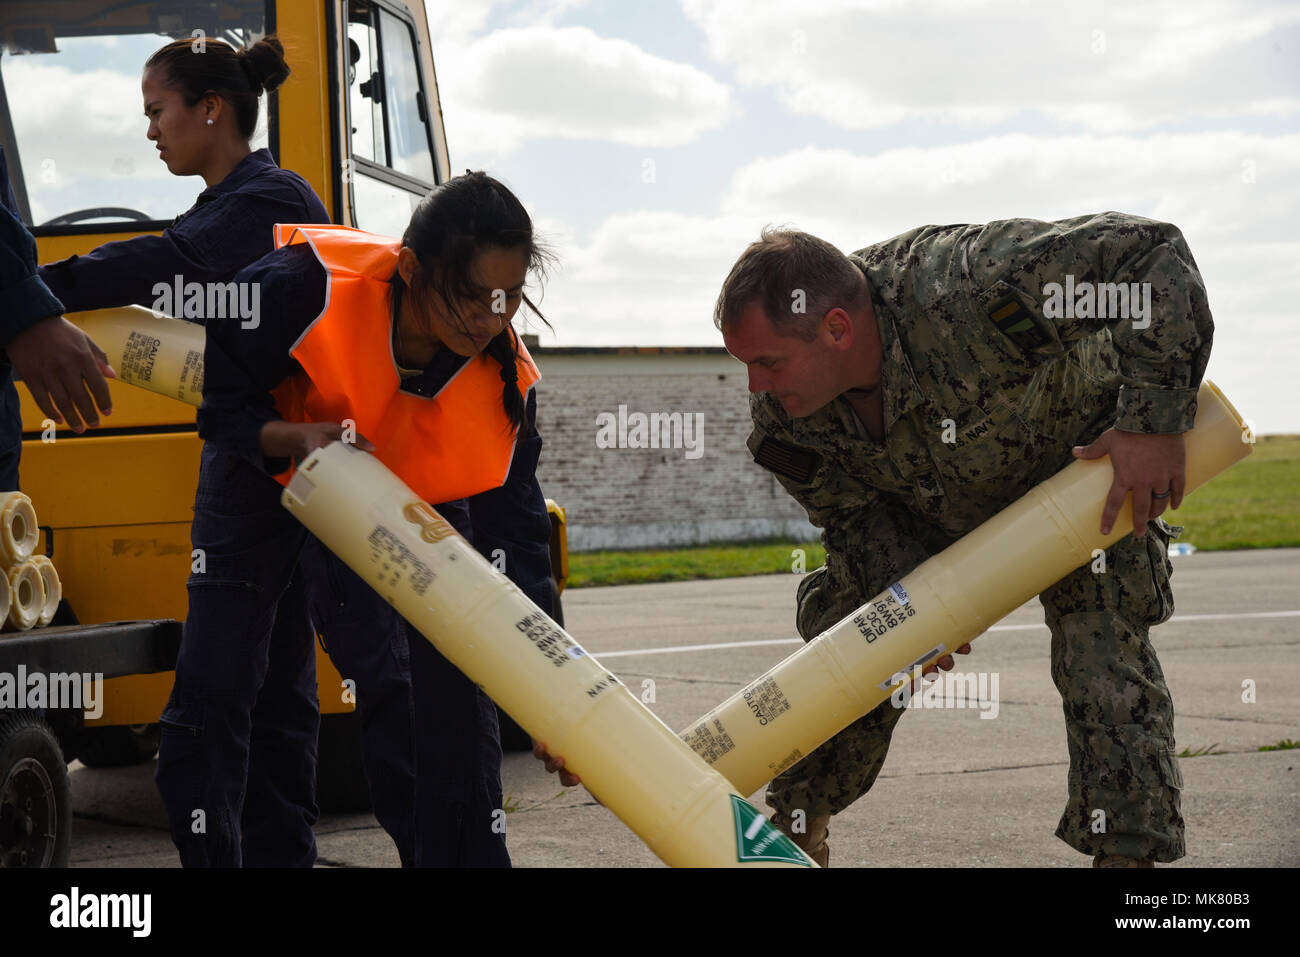 171124-N-IT277-007  Bahia Blanca, ARGENTINA (Nov. 23, 2017) Members of the Argentine Navy help Sailors from the ‘Mad Foxes’ of Patrol Squadron (VP) 5and the ‘Pelicans’ of VP-45load empty sonobouy casings onto a transport vehicle. Sailors from VP-5 and VP-45 are currently in Bahia Blanca as part of a detachment from Commander, Patrol and Reconnaissance Wing (CPRW) 11 assisting the Argentine military in their search for the missing Argentine submarine ARA San Juan. (U.S. Navy photo by Mass Communications Specialist 2nd Class Sean R. Morton/Released) Stock Photo